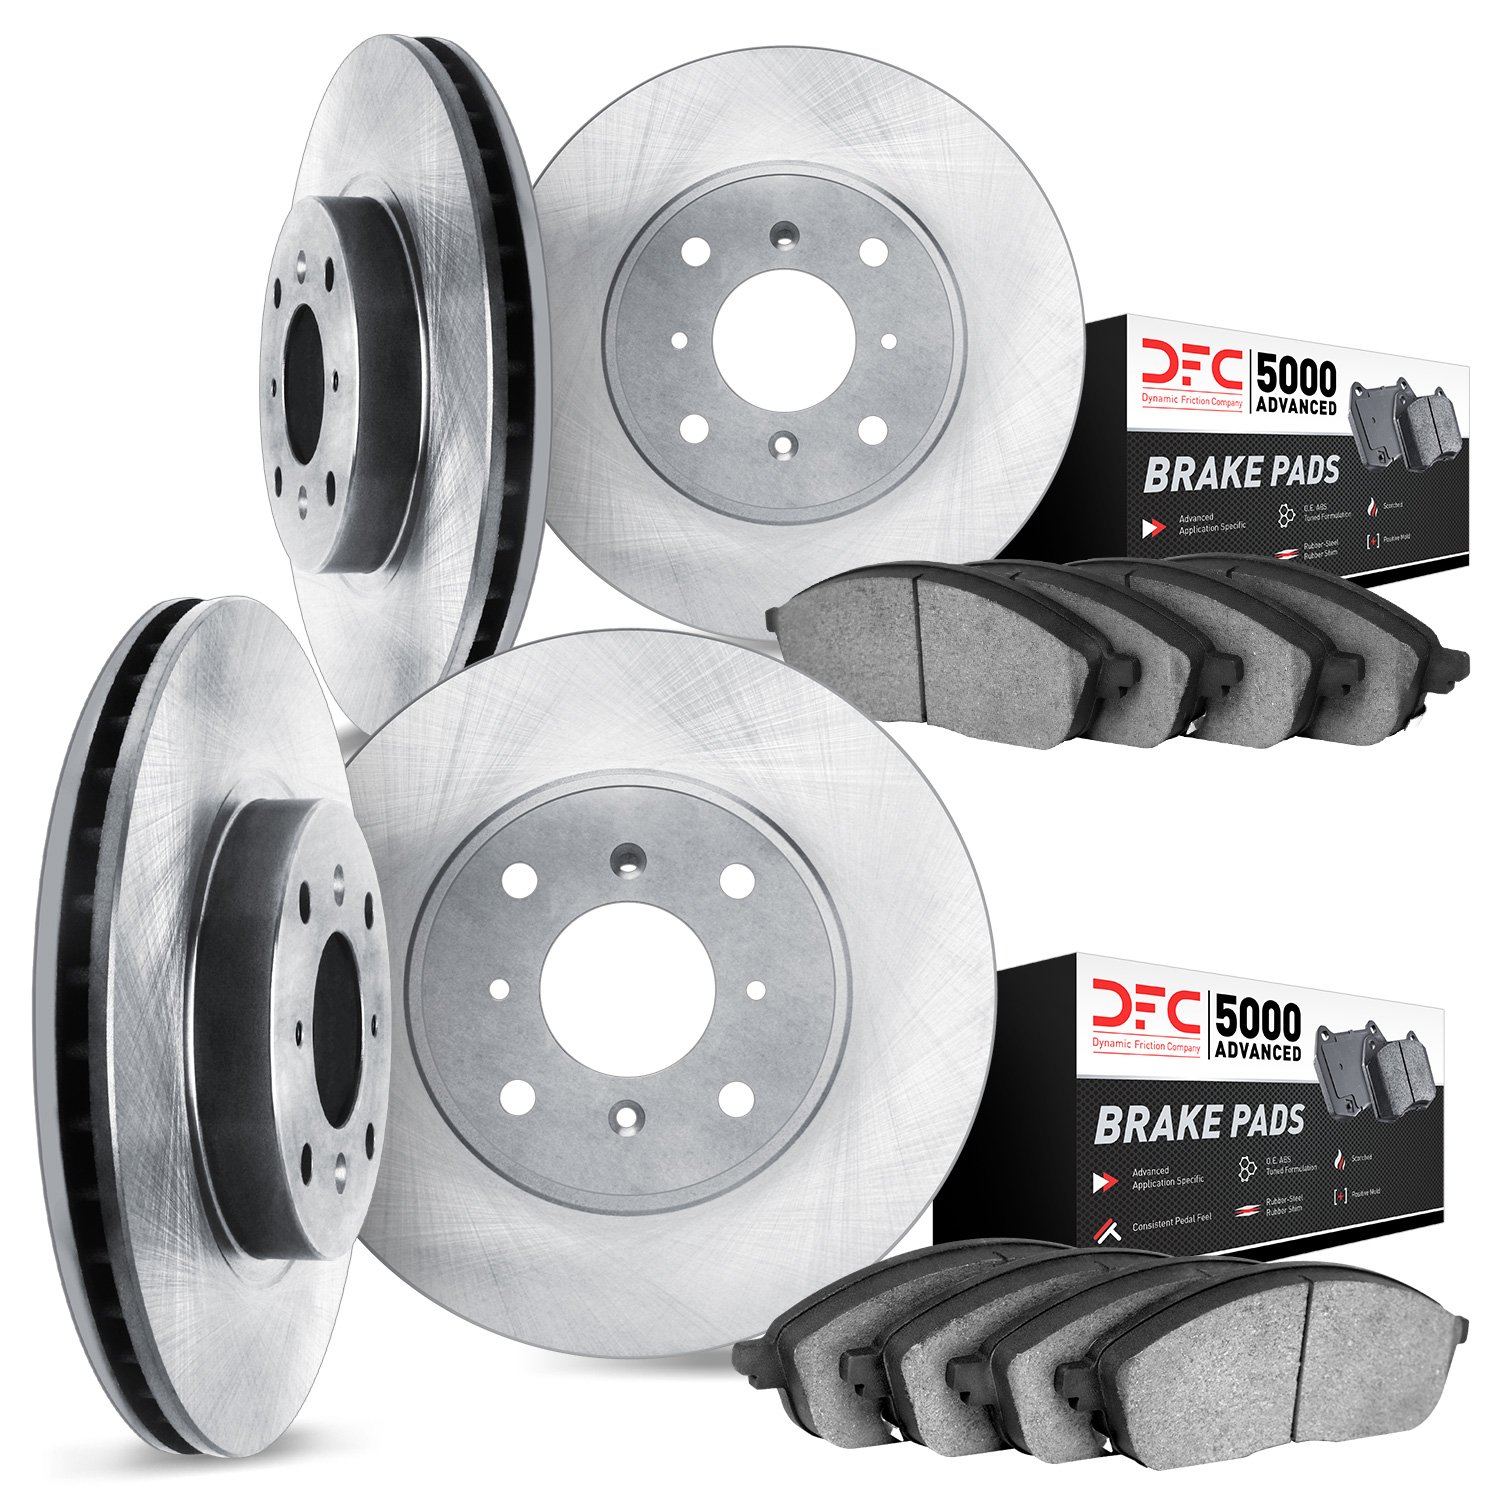 6504-56106 Brake Rotors w/5000 Advanced Brake Pads Kit, 1998-1999 Ford/Lincoln/Mercury/Mazda, Position: Front and Rear